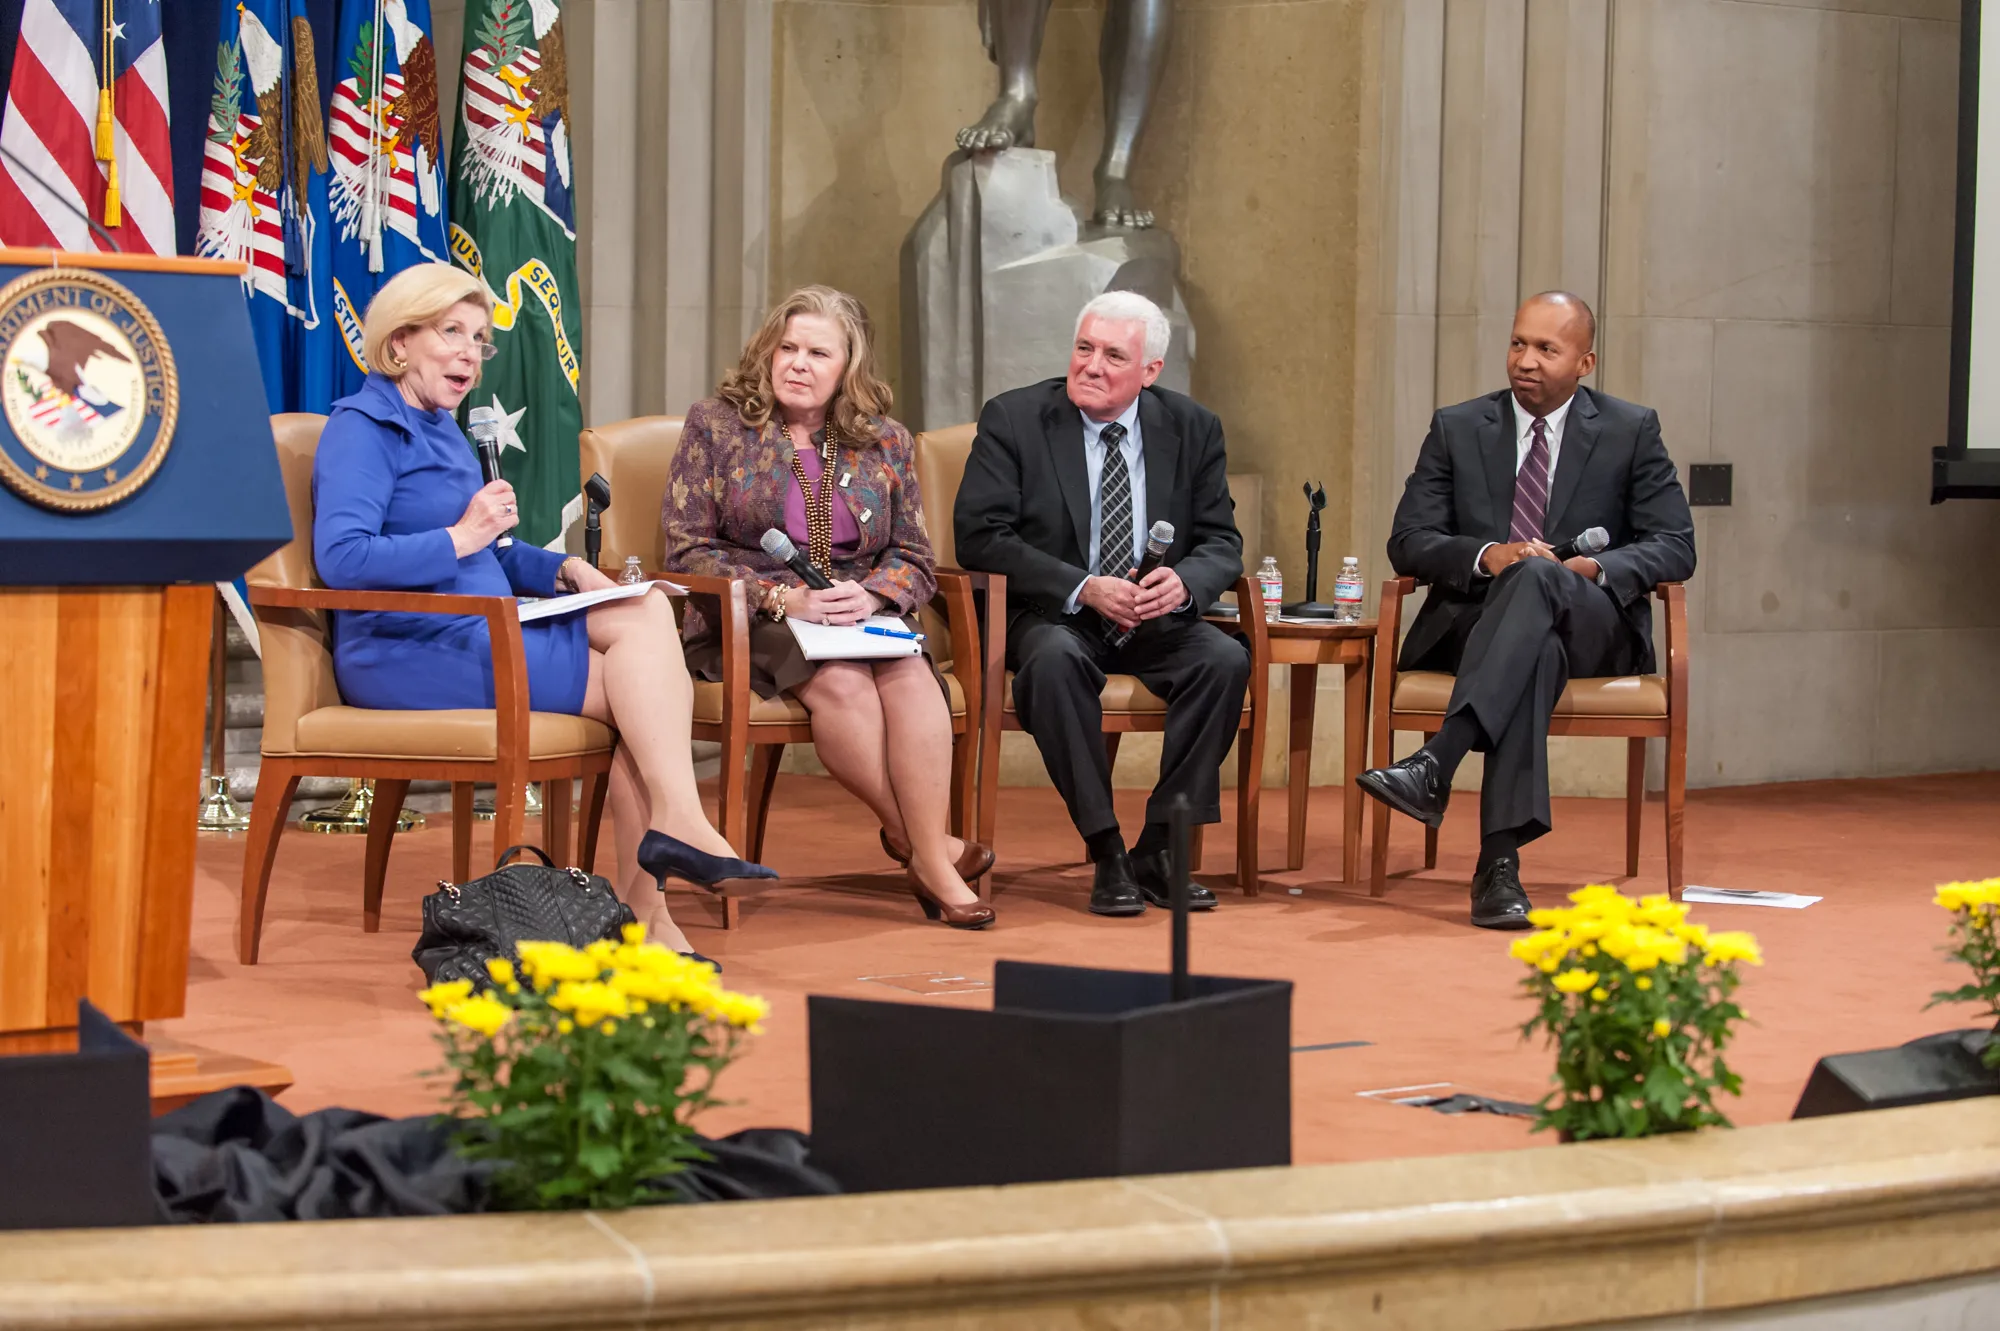 Photo showing: This image depicts Sue Bell Cobb, Chief Justice of the Supreme Court for the State of Alabama (second from left) at a panel discussion held by the Department of Justice on the subject of the court decision of Gideon v. Wainwright on March 15, 2013.